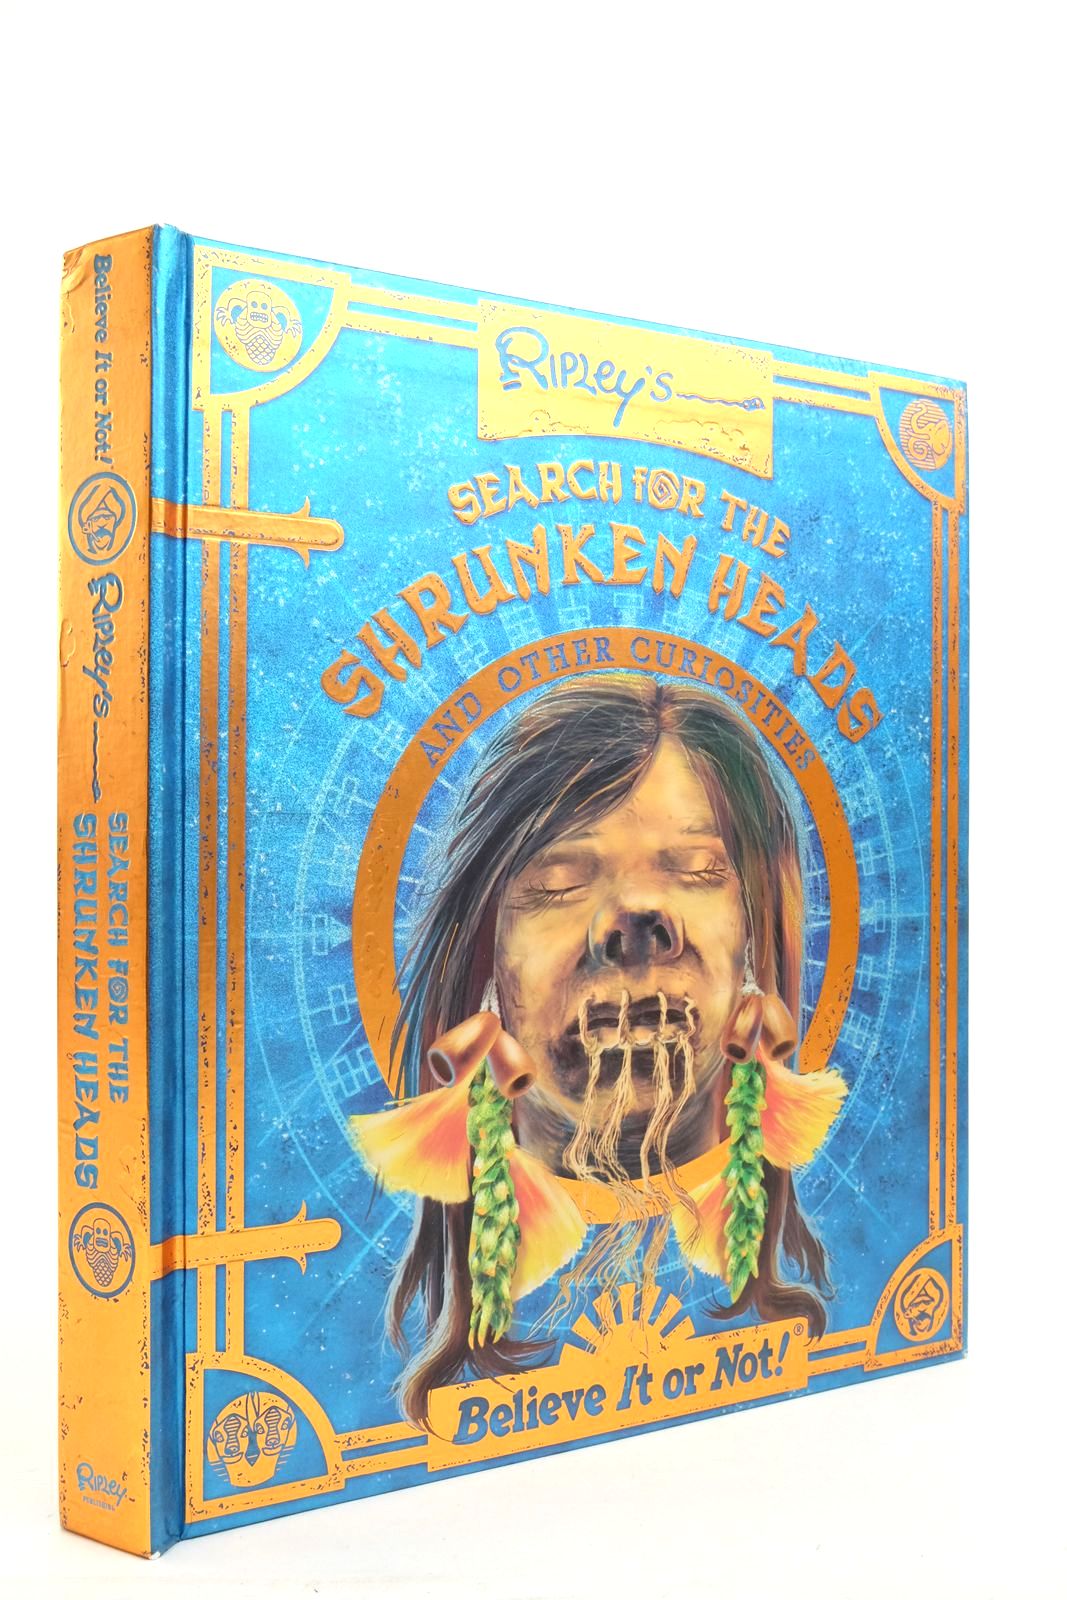 Photo of RIPLEY'S SEARCH FOR THE SHRUNKEN HEADS AND OTHER CURIOSITIES written by Ripley, Robert L. illustrated by Ripley, Robert L. published by Ripley Entertainment Inc. (STOCK CODE: 2137350)  for sale by Stella & Rose's Books